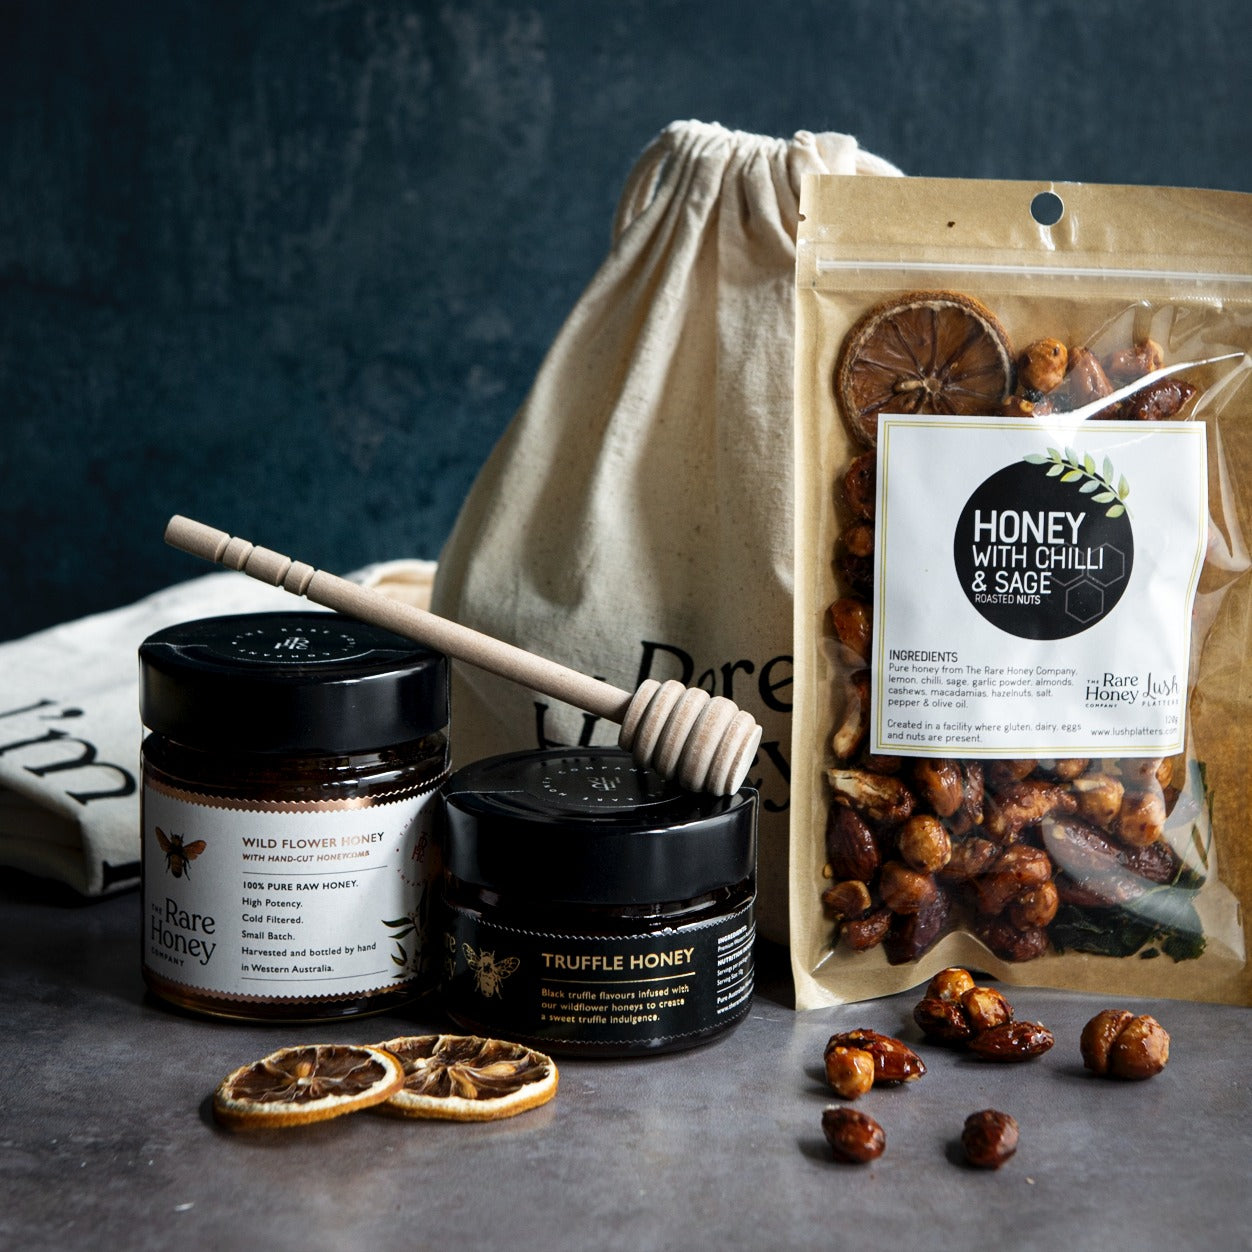 Limited edition festive pack with black truffle infused honey and hand cut honeycomb